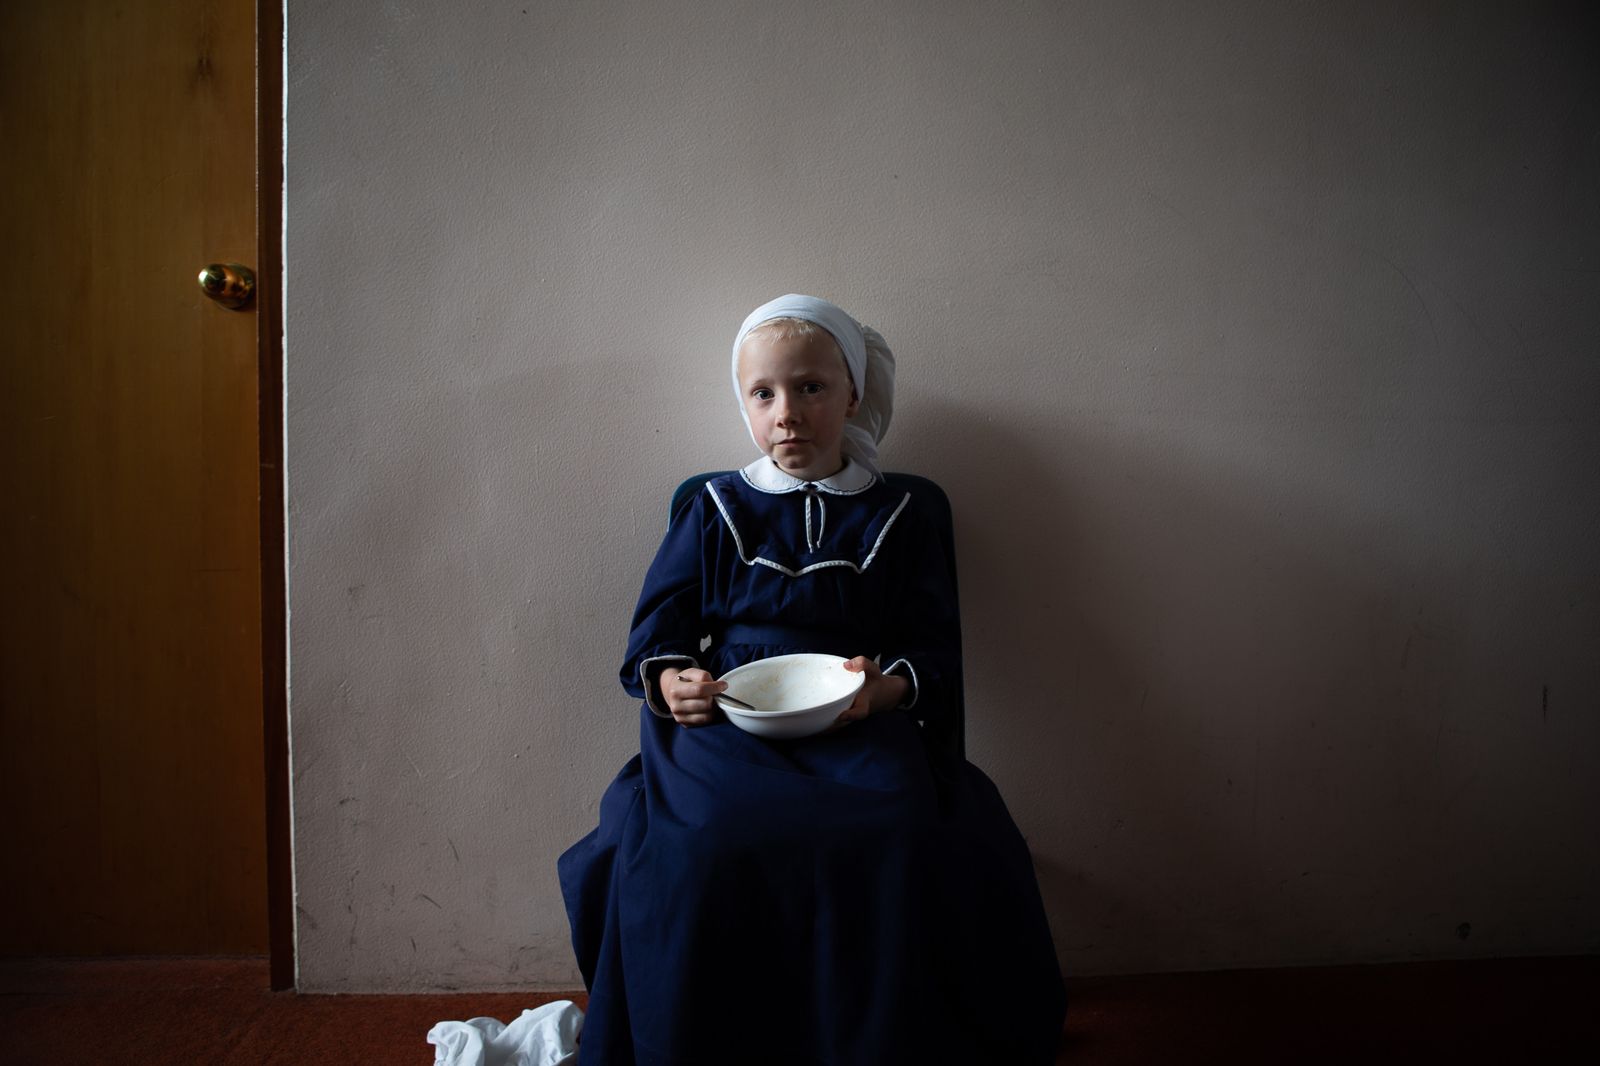 © Marta Bortoli - Image from the Blue is the colour of the sky photography project